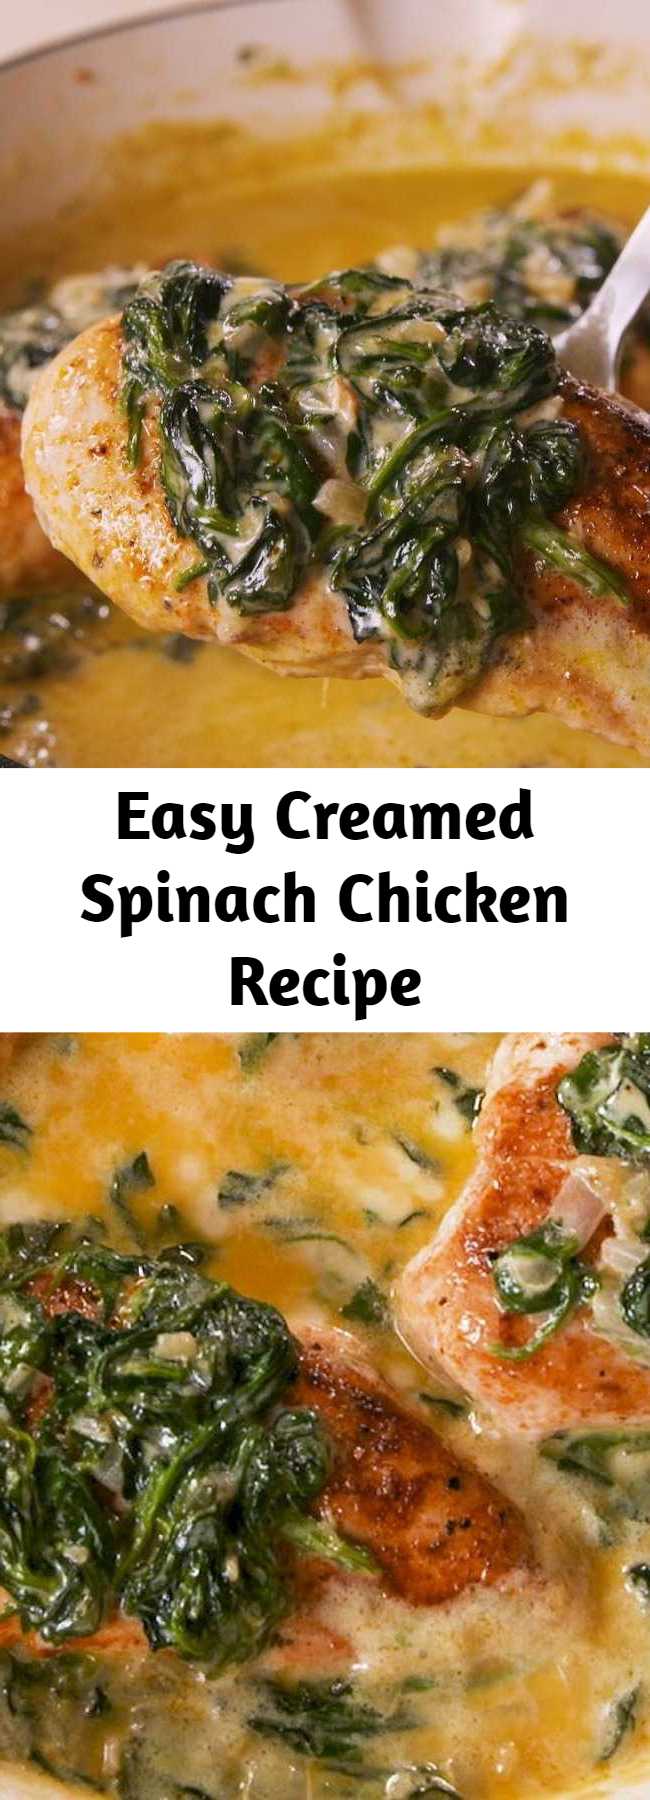 Easy Creamed Spinach Chicken Recipe - You'll be eating straight out of the pan. #food #easyrecipe #chickenrecipe #onepot #dinner